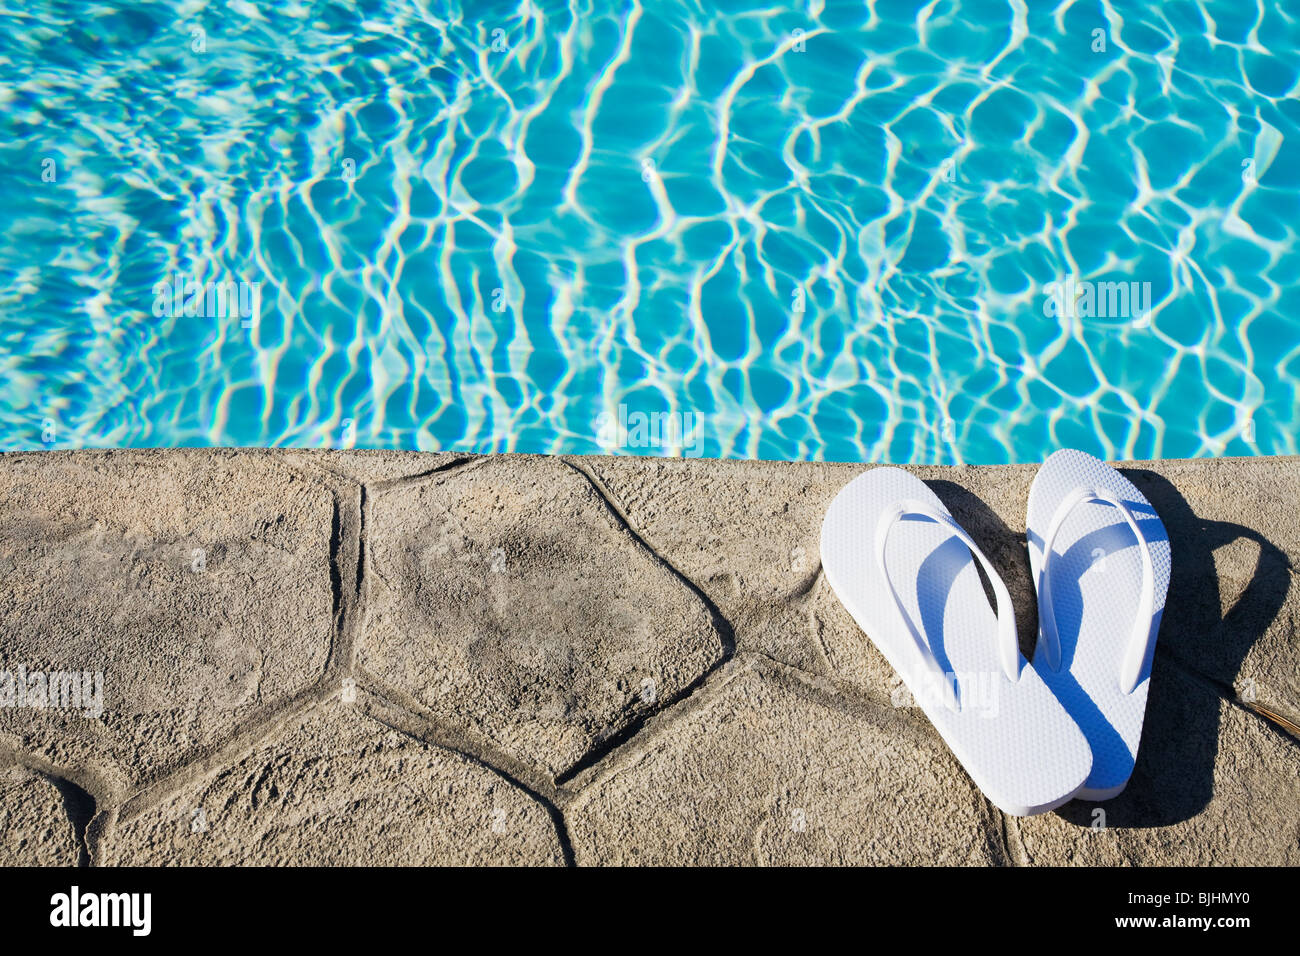 Flip flops by the pool Stock Photo - Alamy